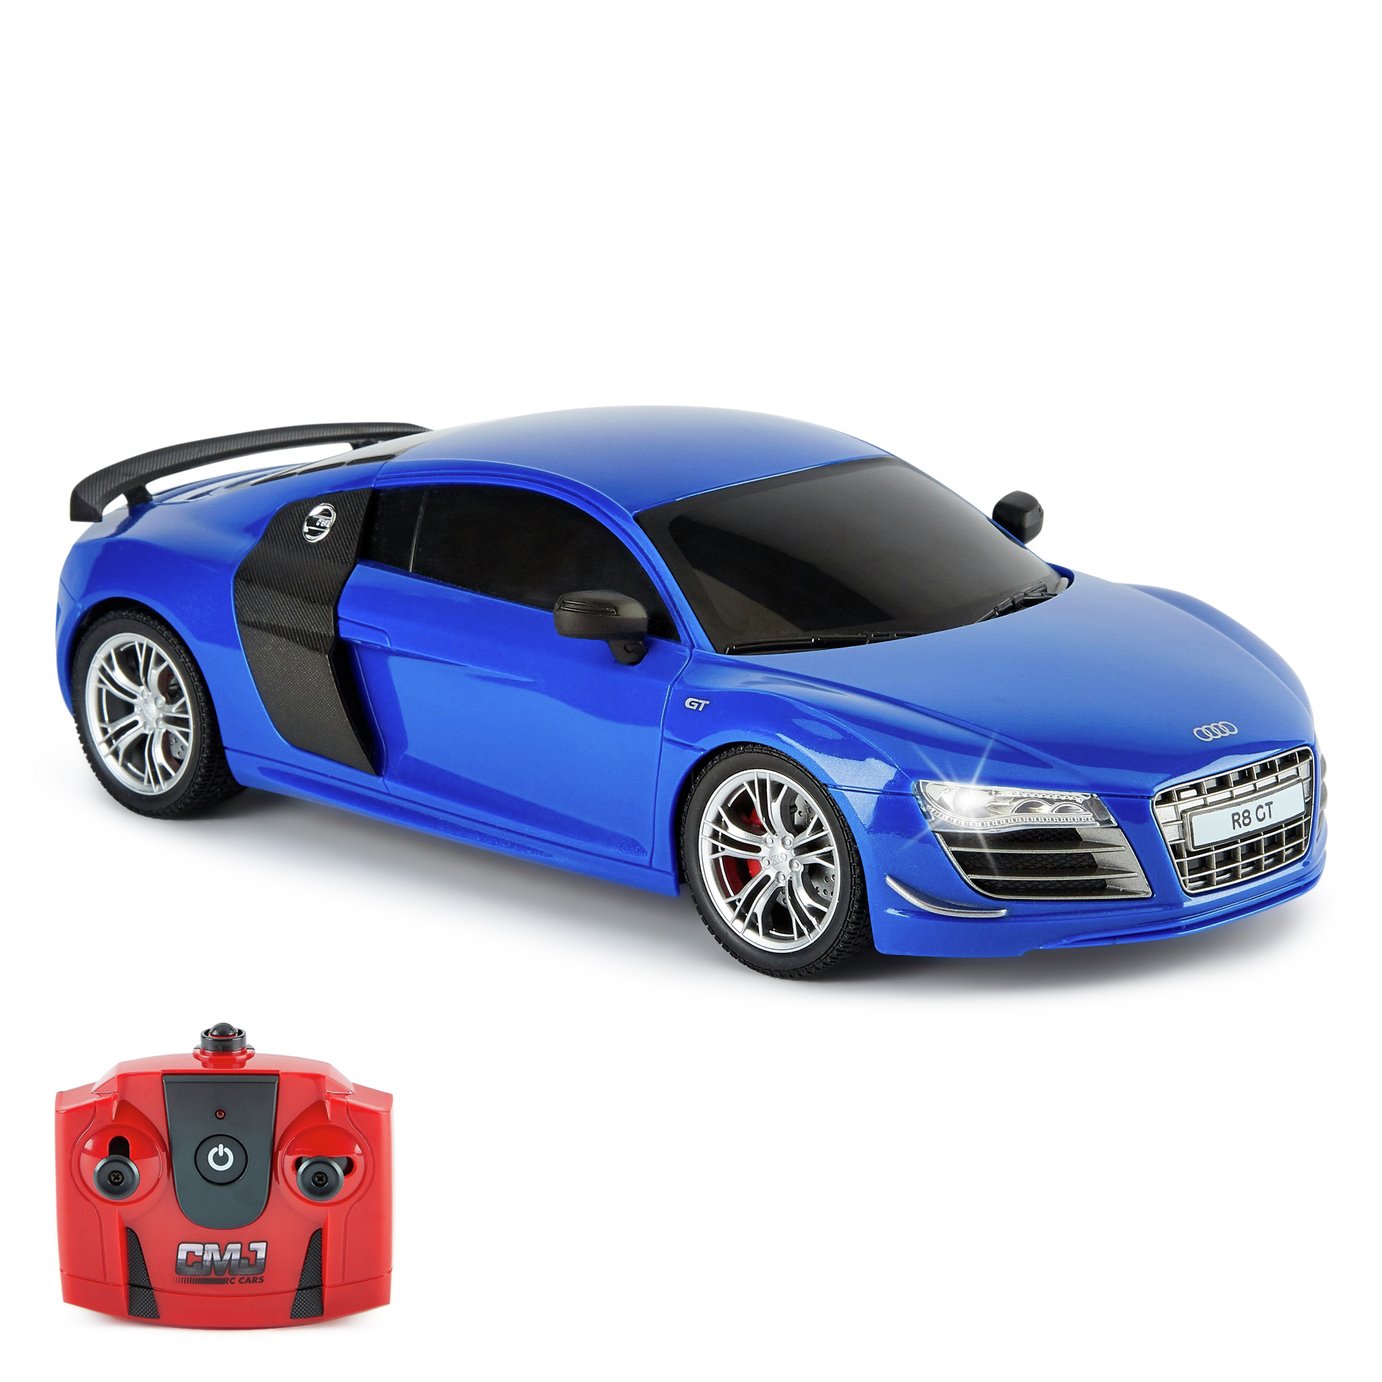 Audi Radio Controlled R8 1:24 Car review